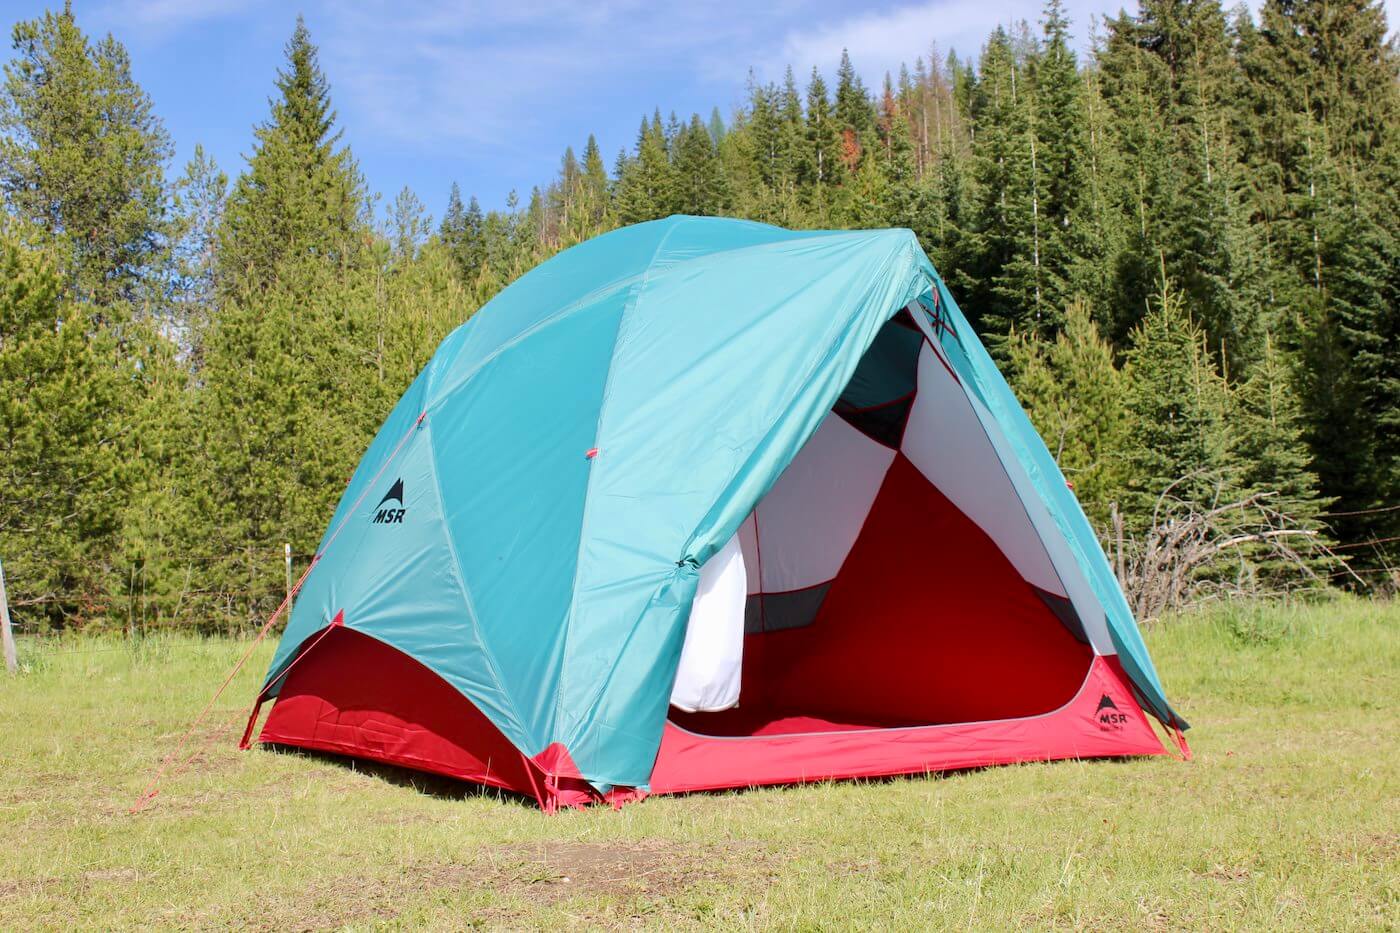 MSR Habitude Tent Review: 'Ready for Adventure' - Man Makes Fire